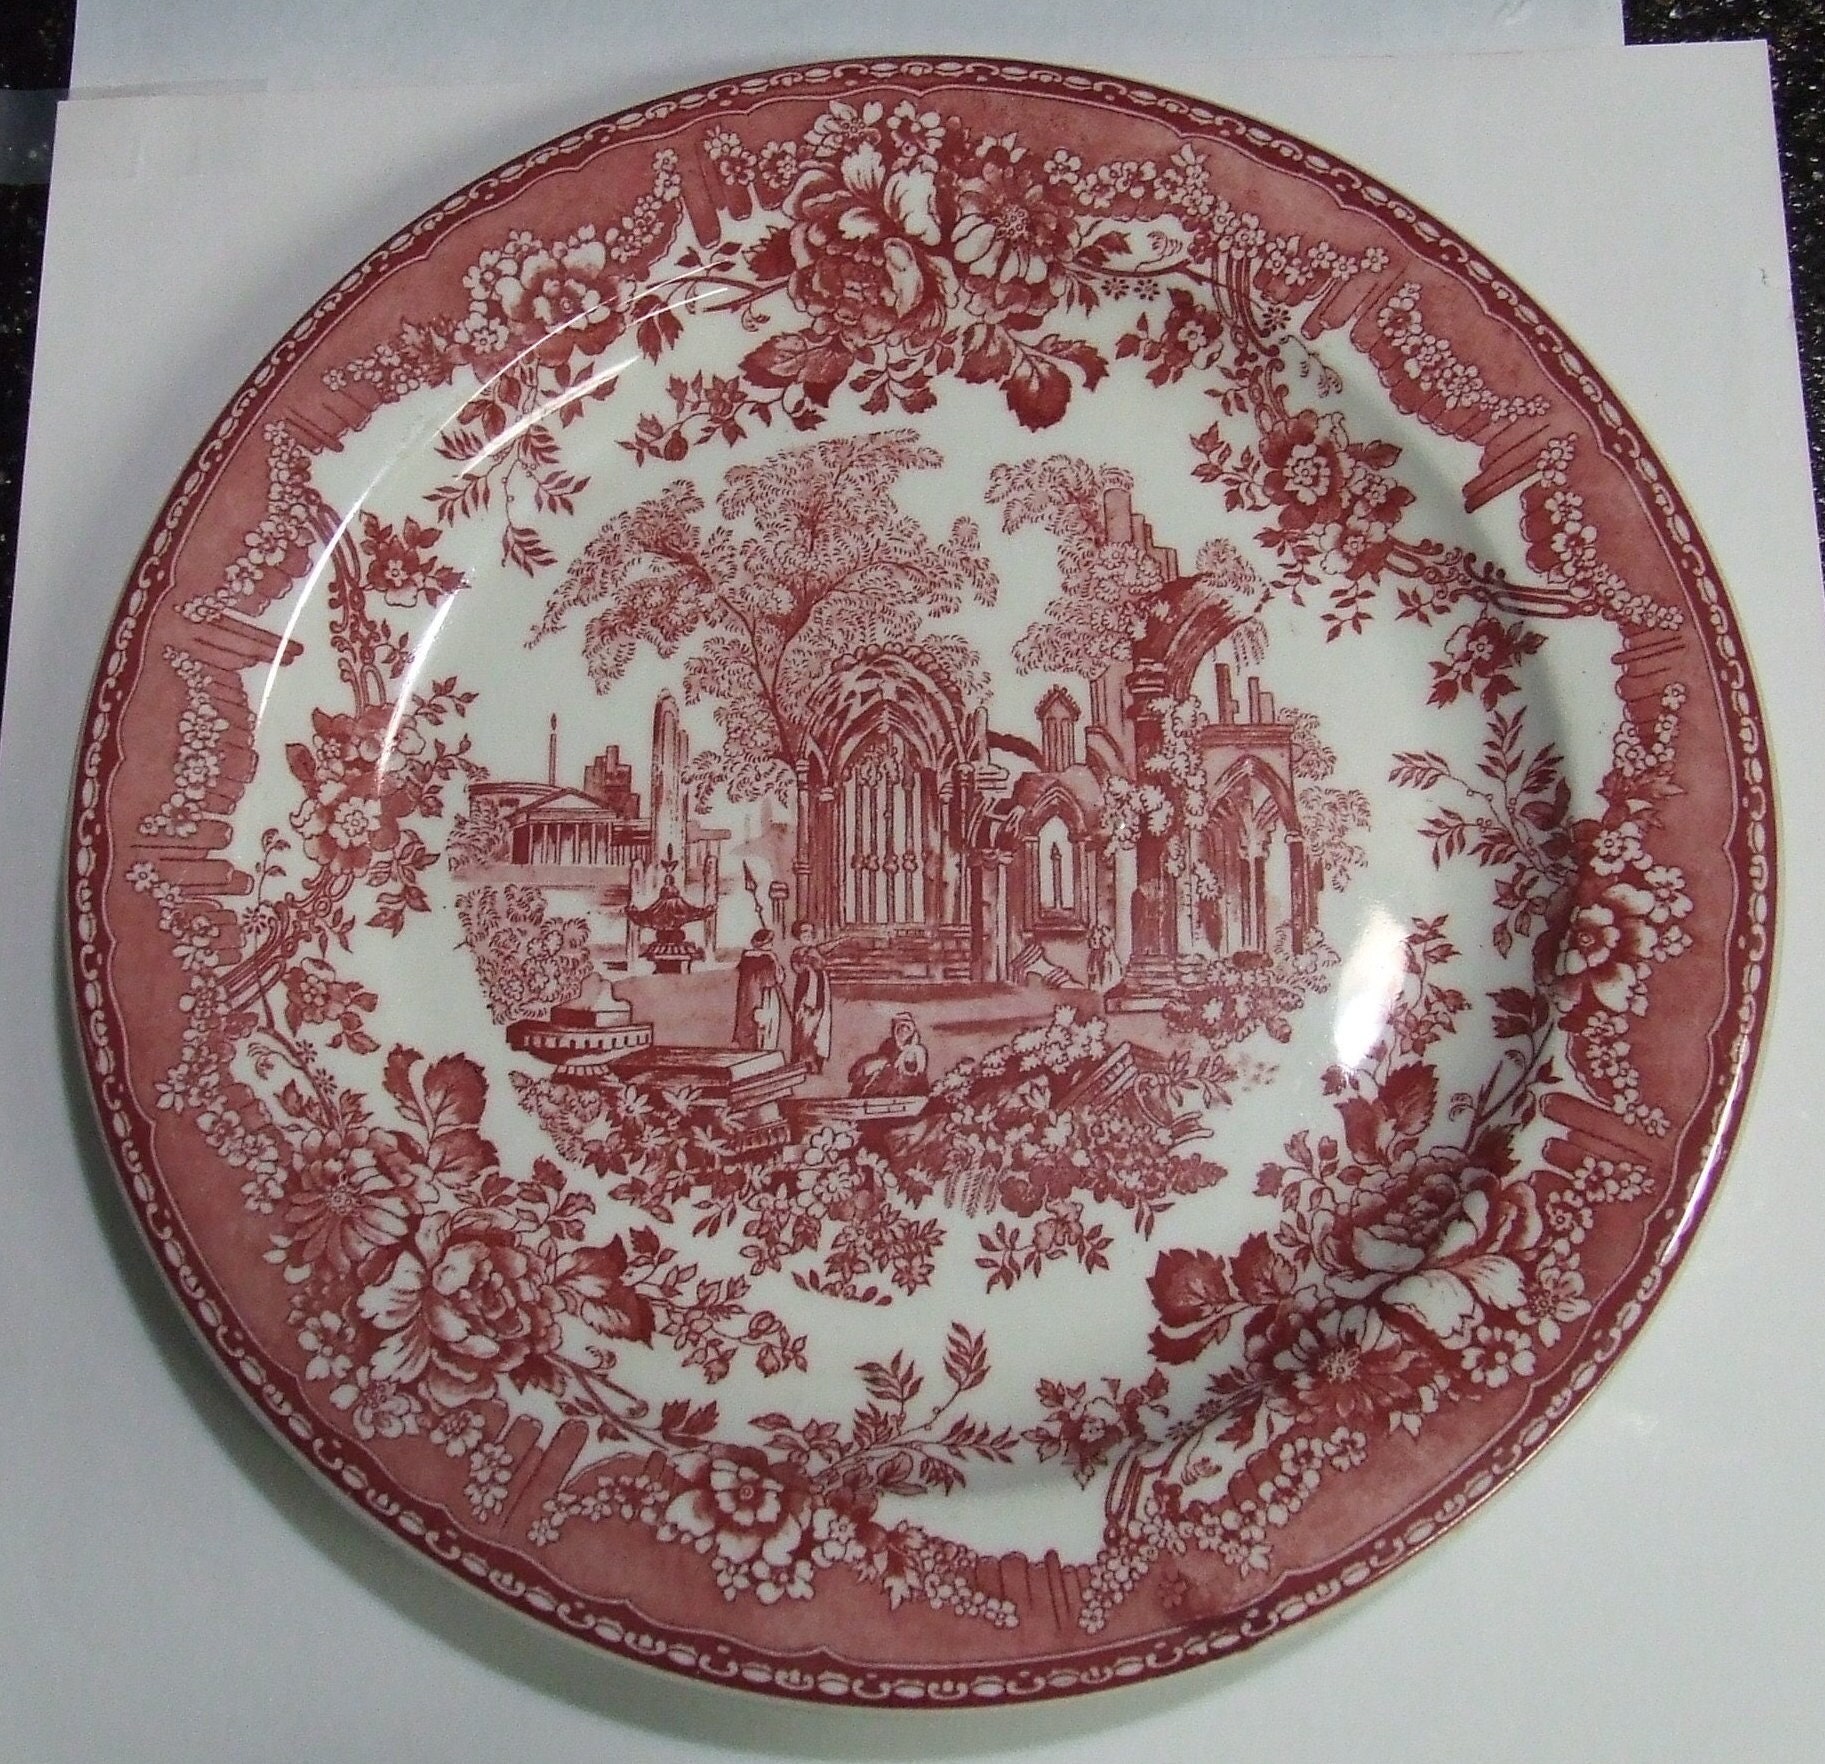 Vintage Ceramic Buffalo China Restaurant Ware Red Country Garden Plate